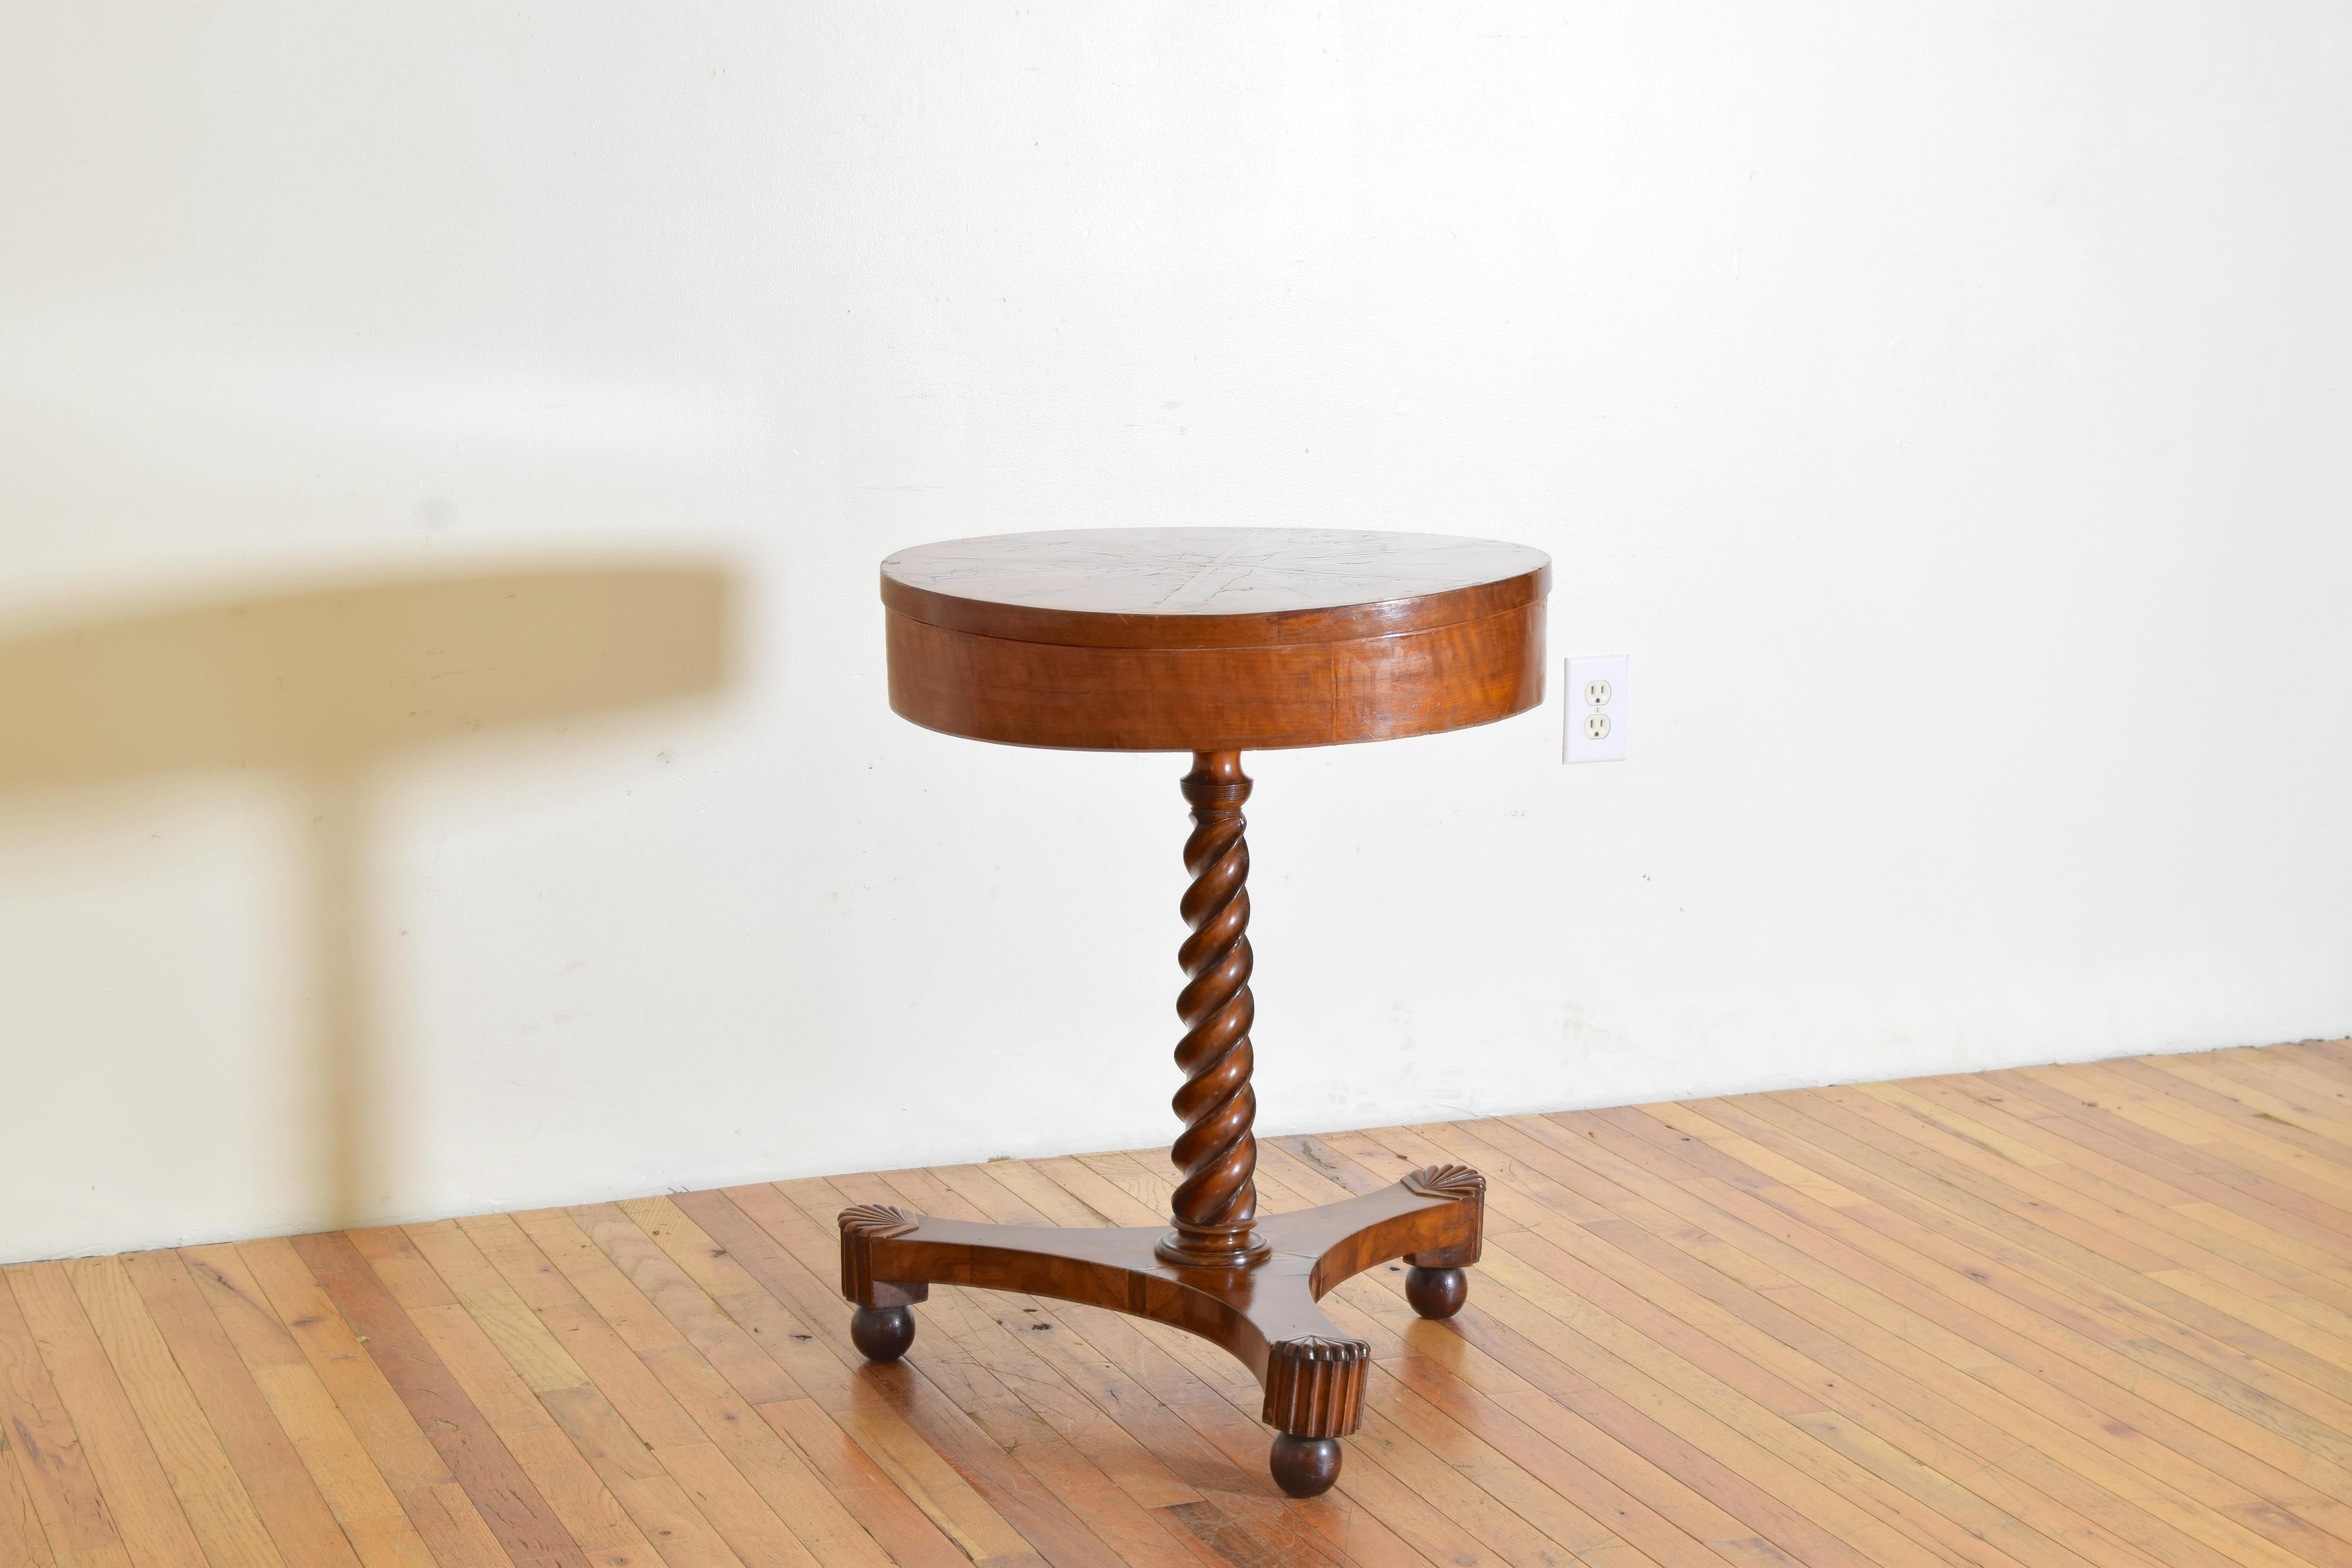 This thoughtfully crafted  table has a rotating top with an inlaid star pattern at center with wide inlays extending to the ends where they connect with half-rounds on a background of figured walnut veneers, the top twisting when unlocked by a